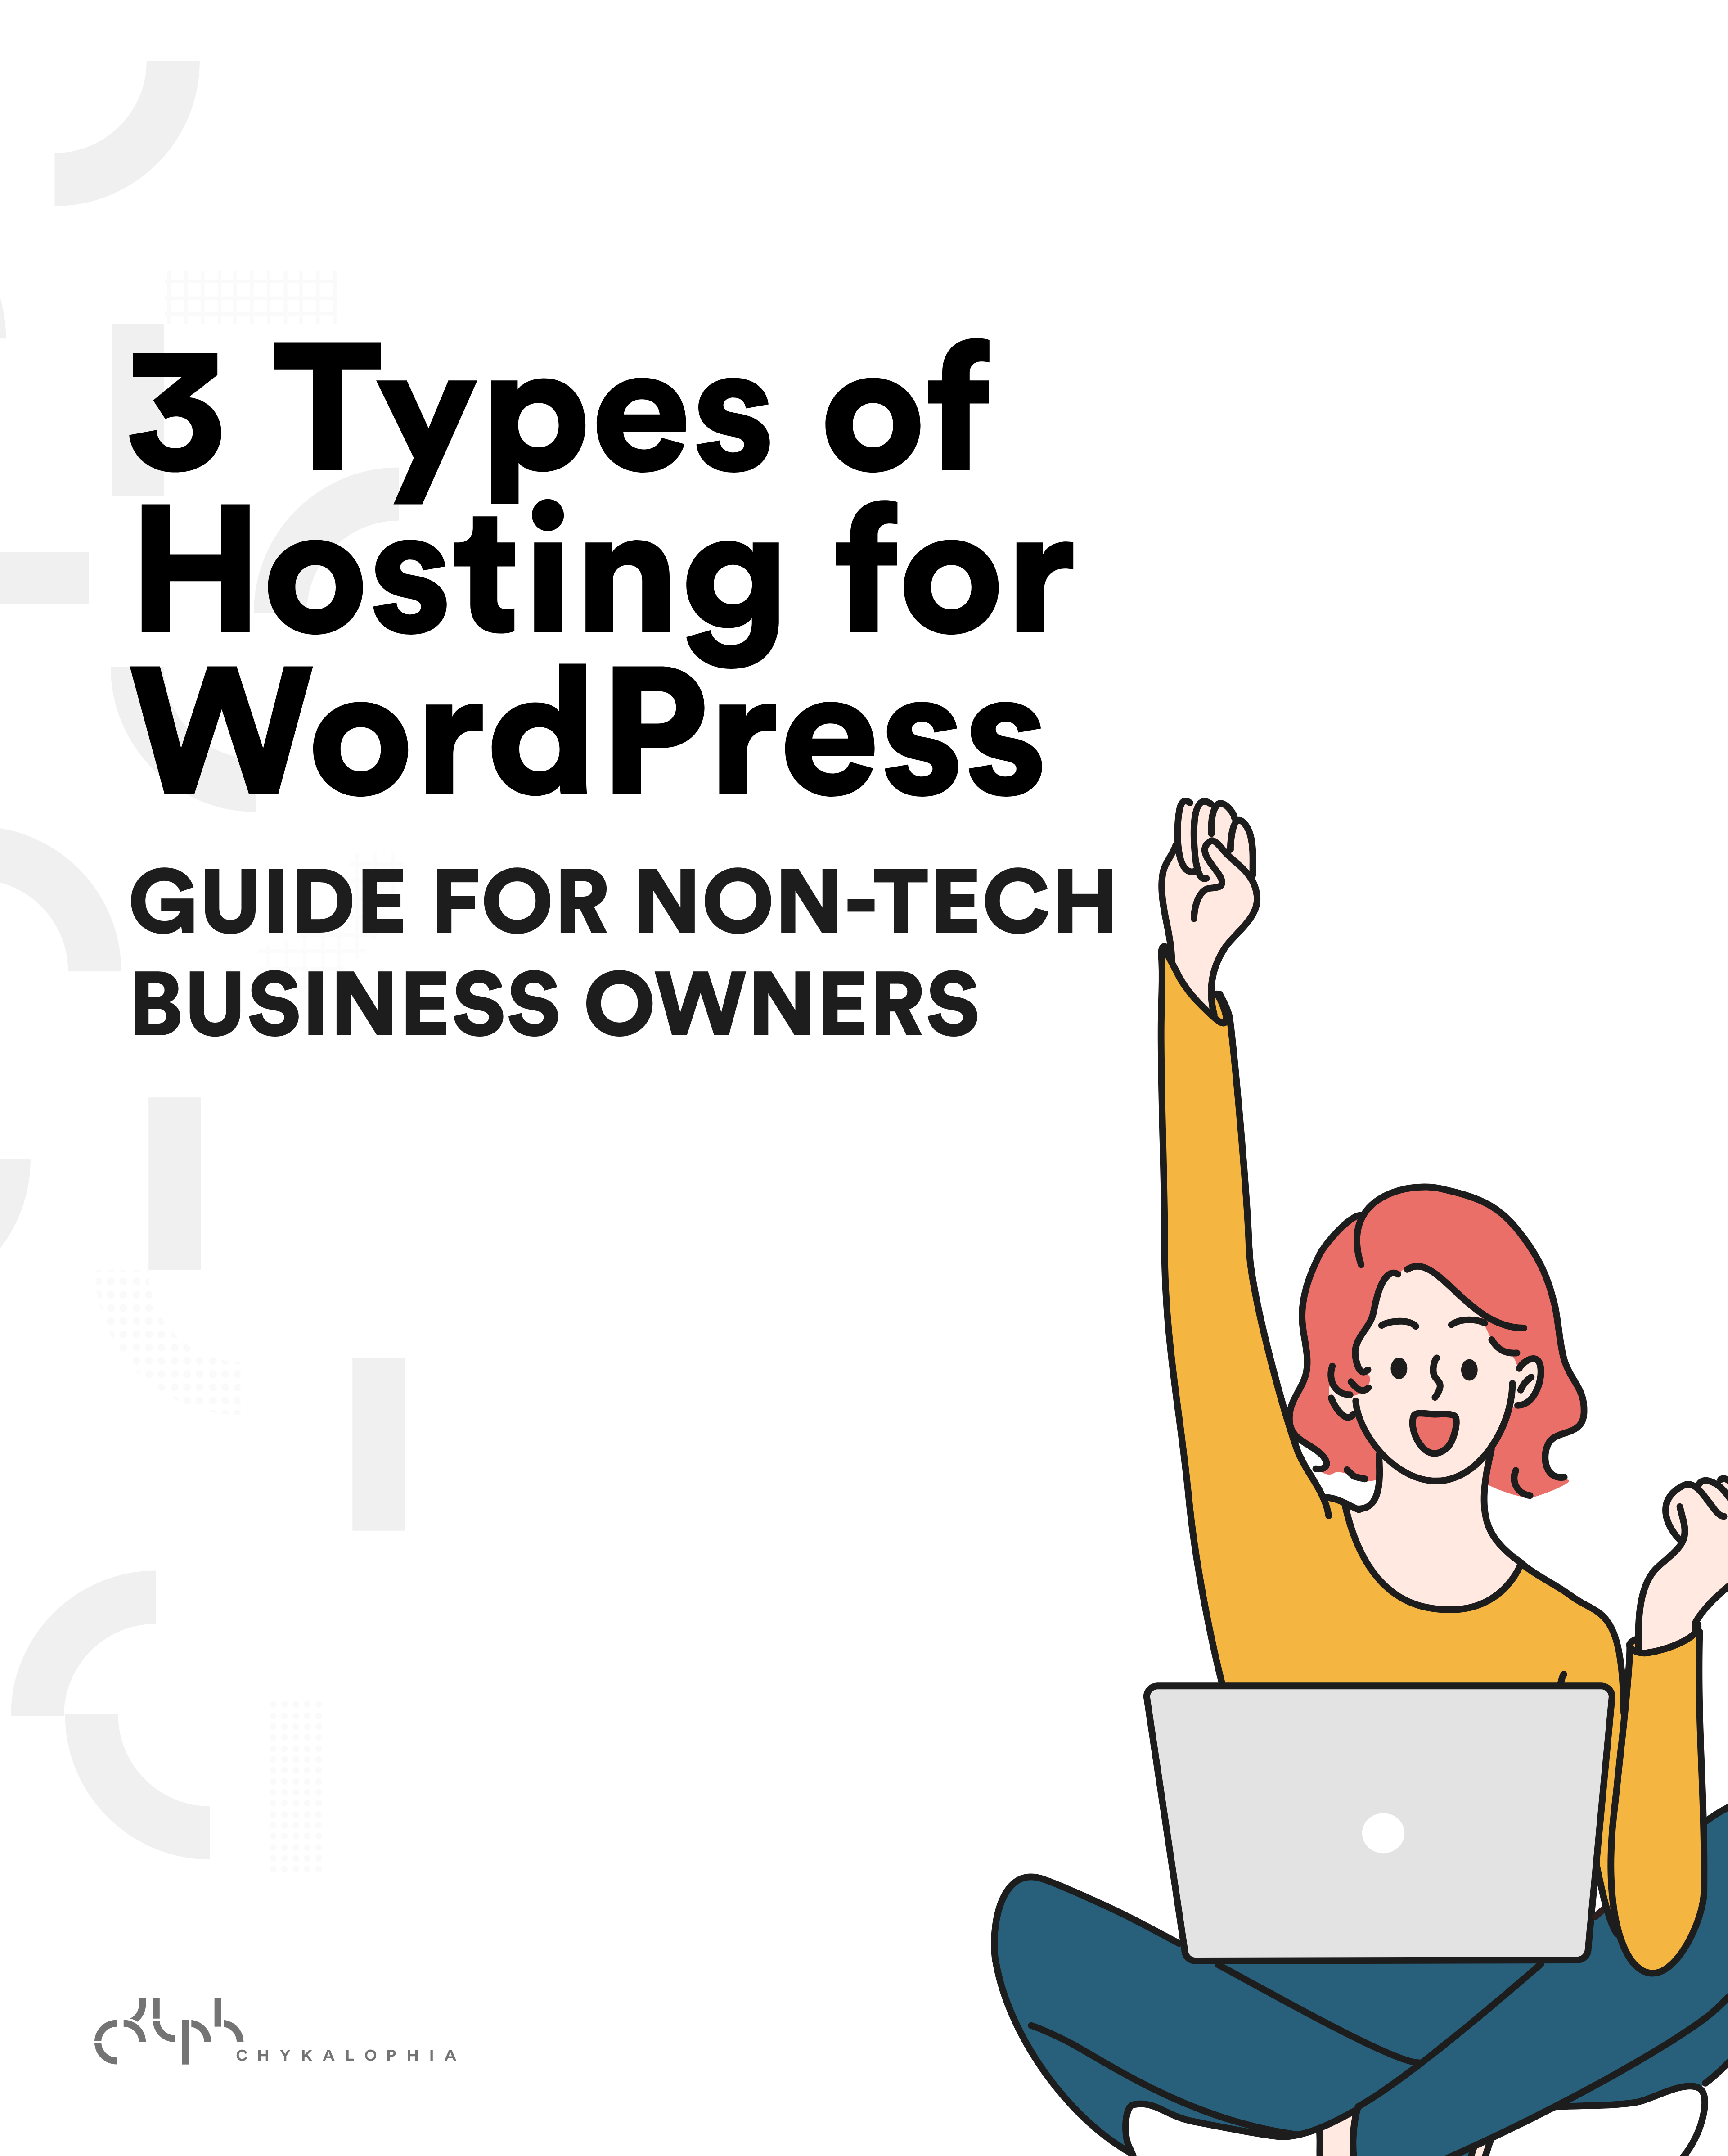 3 Types of Hosting for WordPress - Guide for Non-Tech Business Owners - Chykalophia